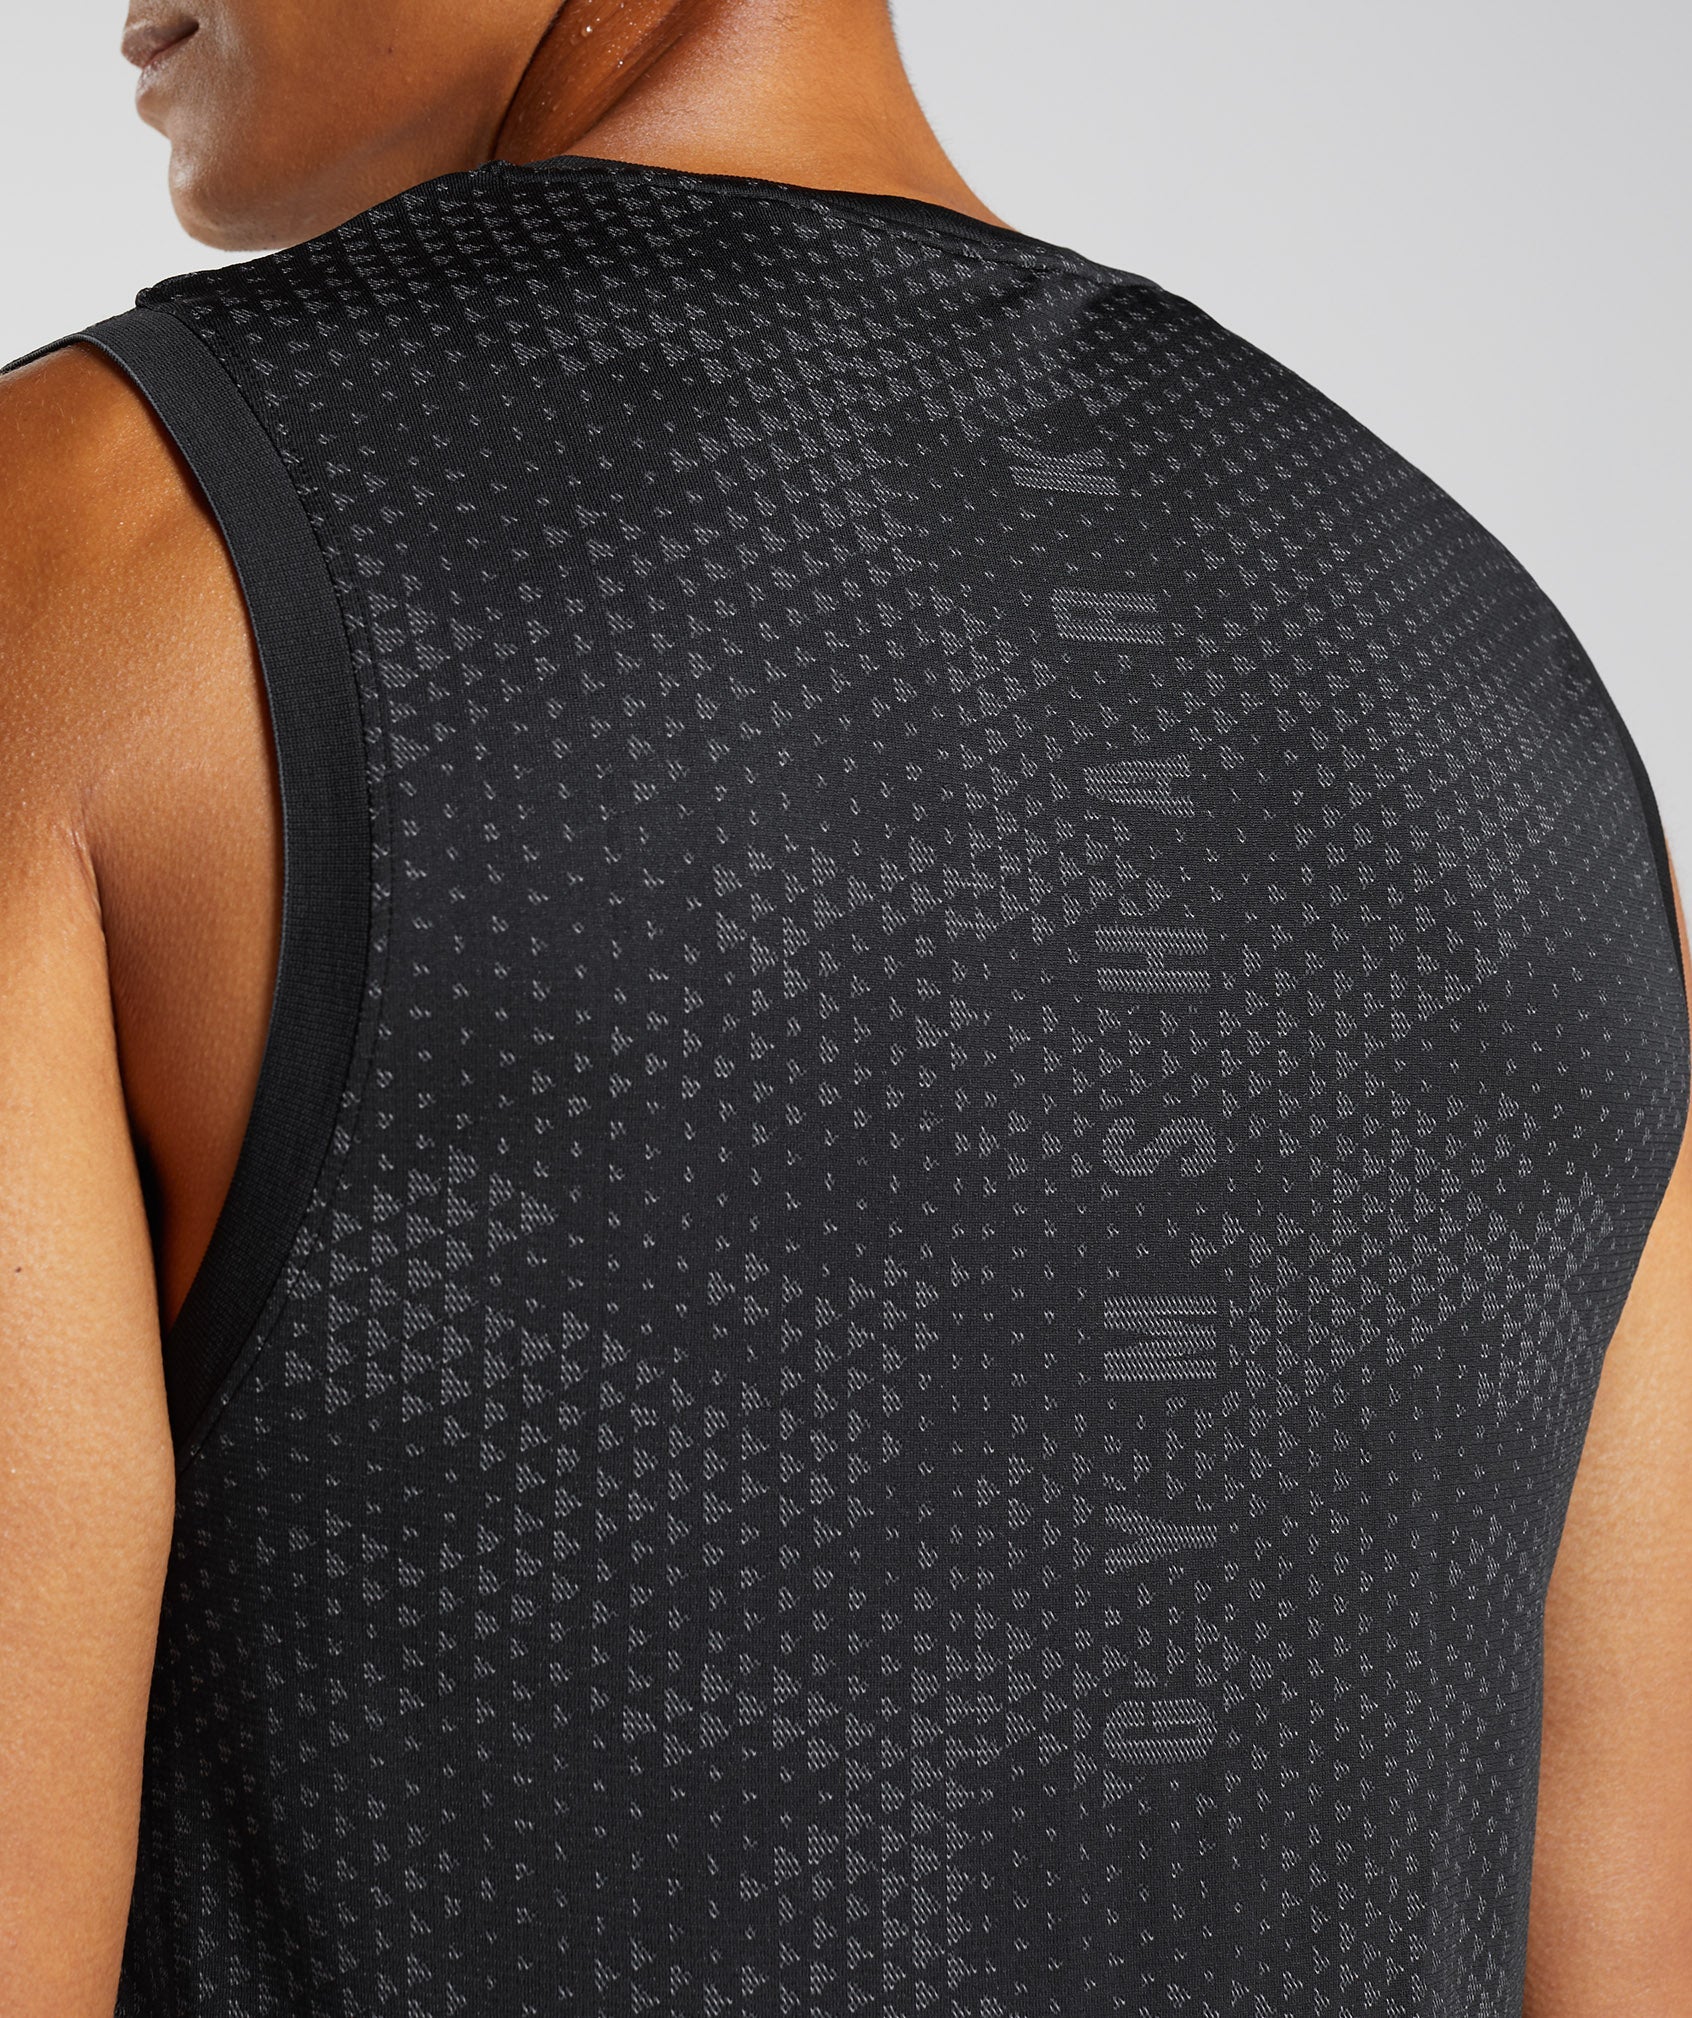 EVERYTHING MUST GO Gymshark ANIMAL GRAPHIC TANK - Tank Top - Women's -  grey/black - Private Sport Shop